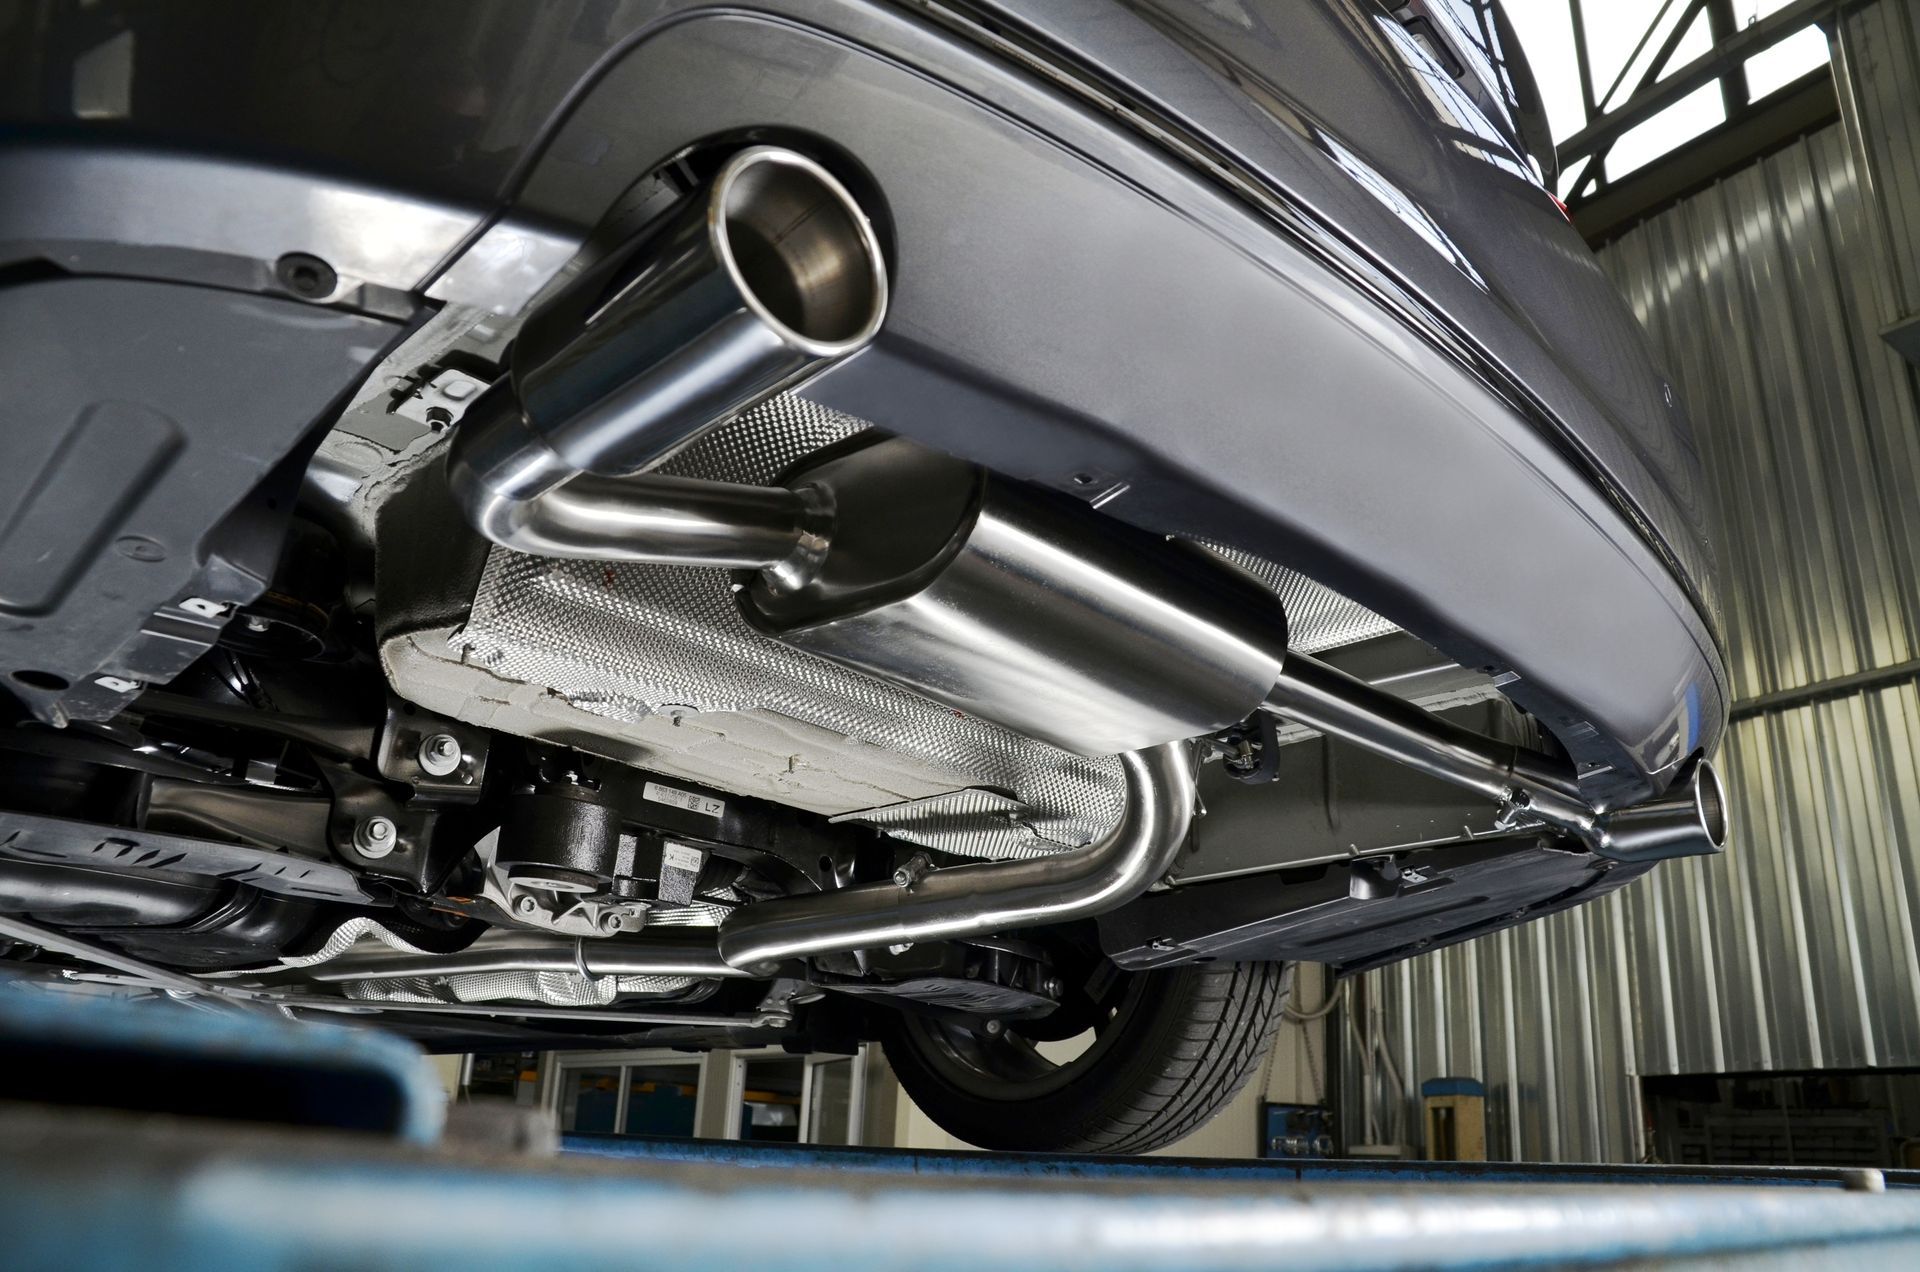 Exhaust Service at ﻿Capeway Auto Service and Towing﻿ in ﻿Hanover, MA﻿